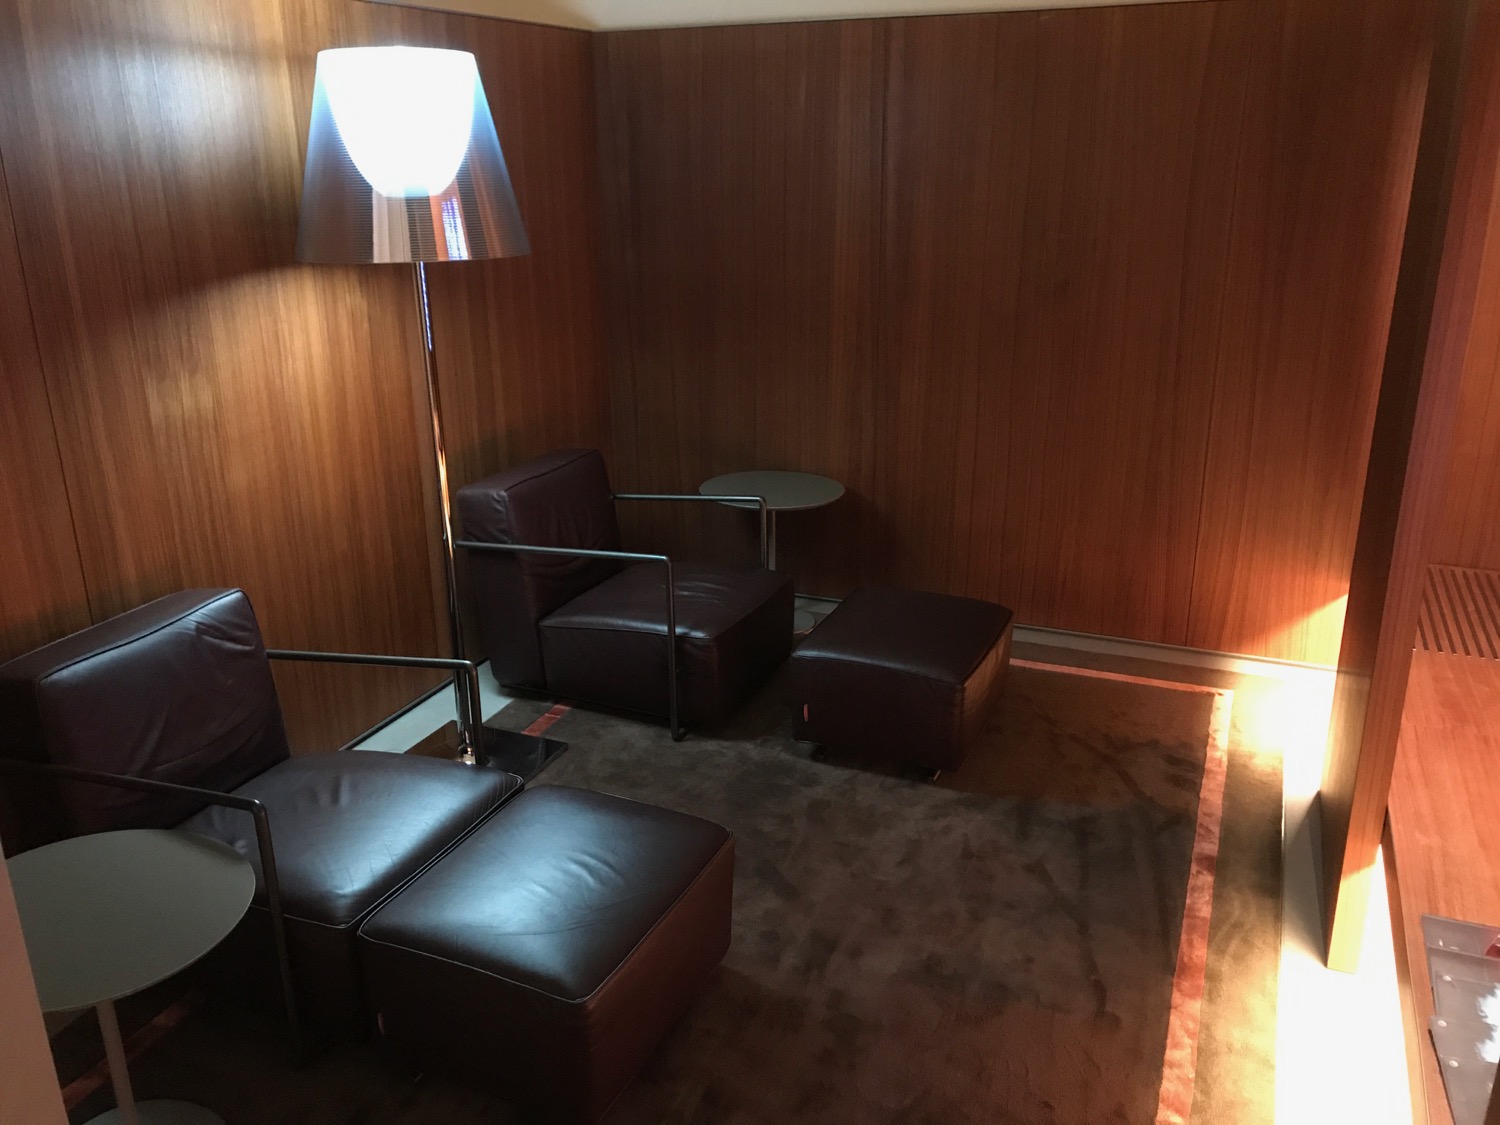 a room with a lamp and leather chairs